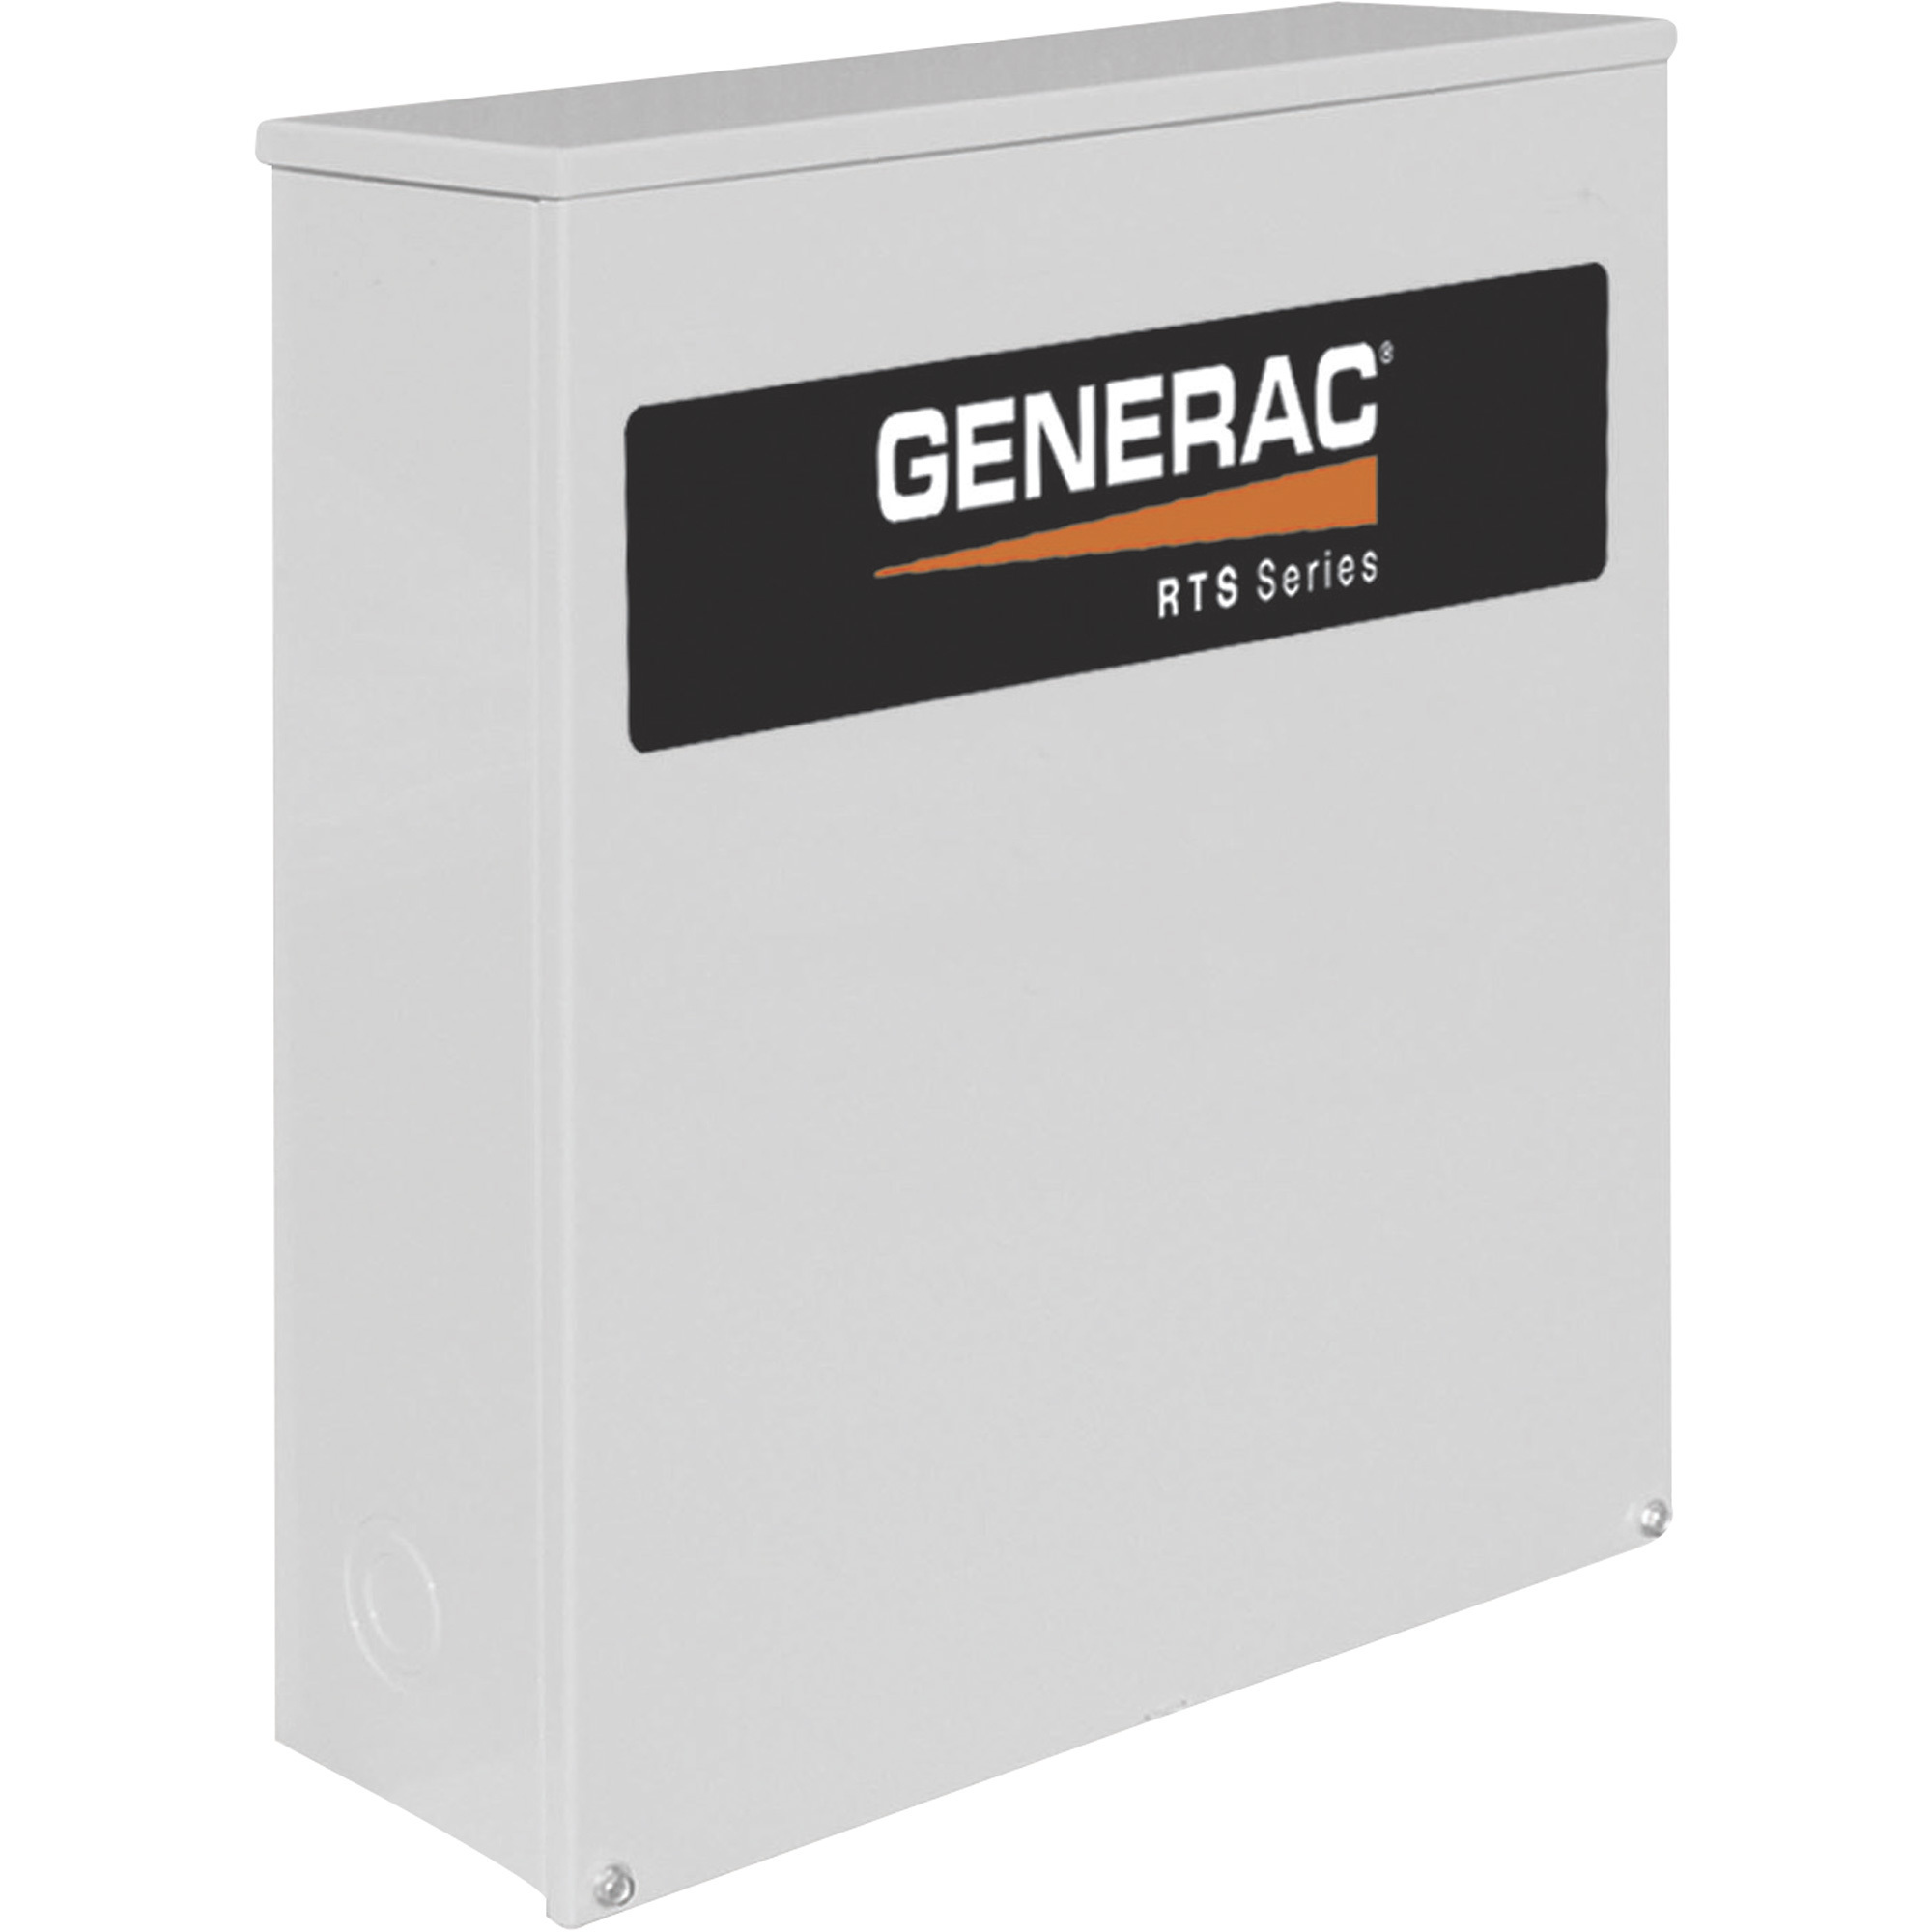 Generac RTS Automatic Generator Transfer Switch, 100 Amp, 120/208 Volts, 3 Phase, Type N, Model RTSN100G3